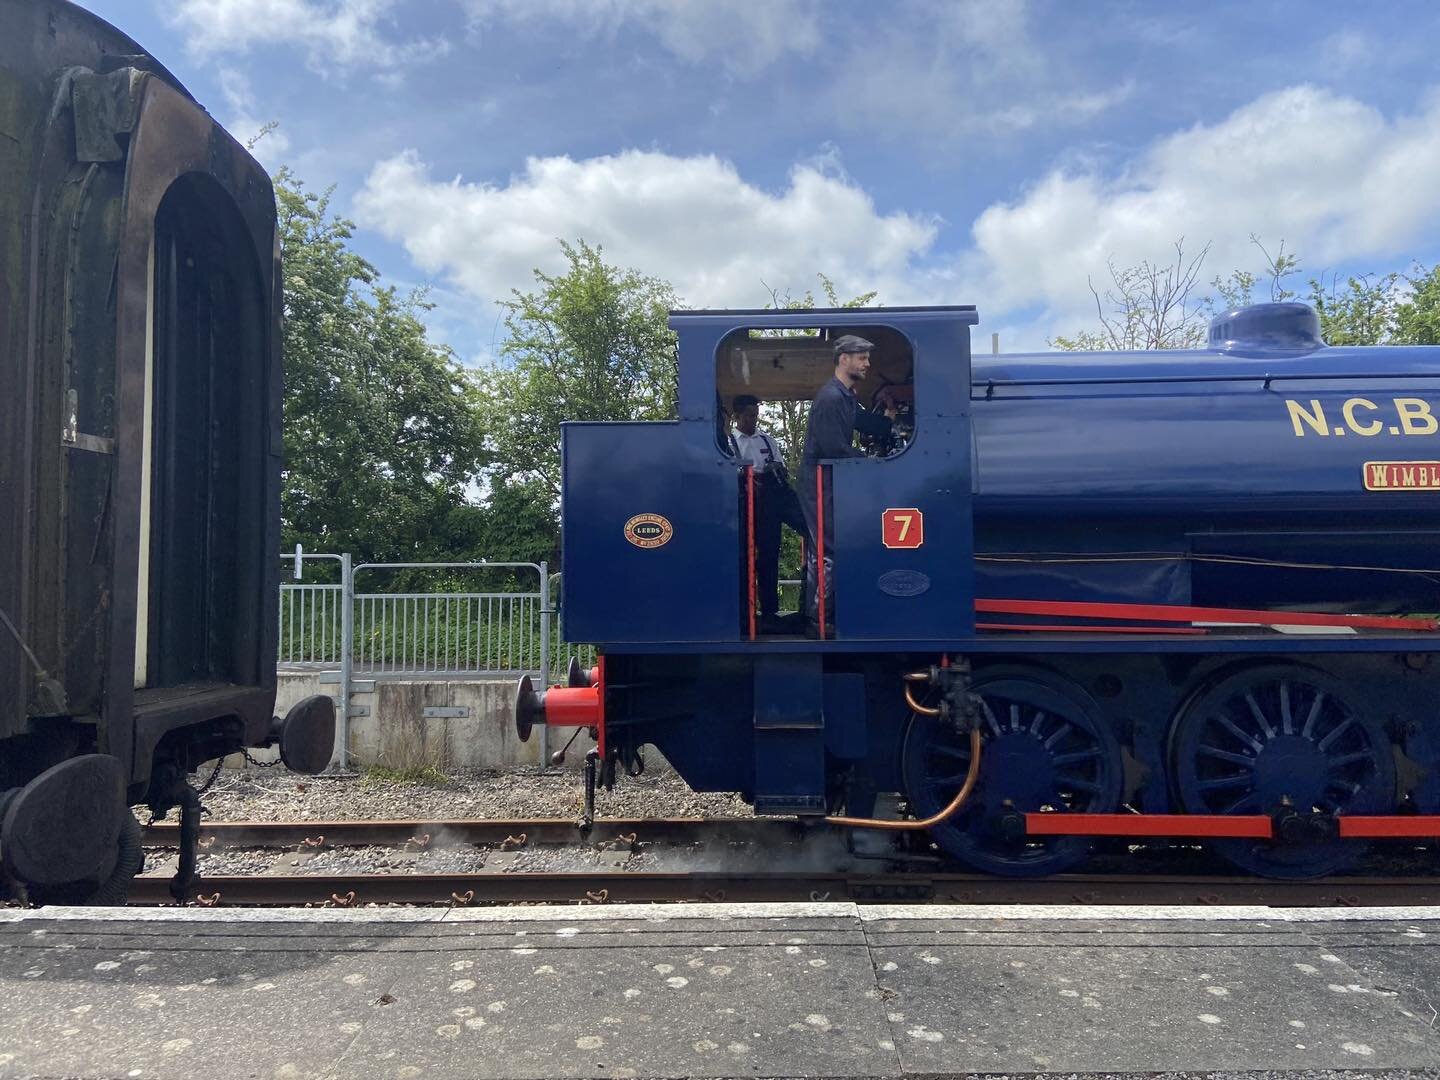 To celebrate the #TheBigHelpOut  we&rsquo;re looking to thank all our volunteers for the hard work they do! 

If you&rsquo;re interested in joining us a volunteer please take a look at our page: https://www.avonvalleyrailway.org/support-us/volunteeri